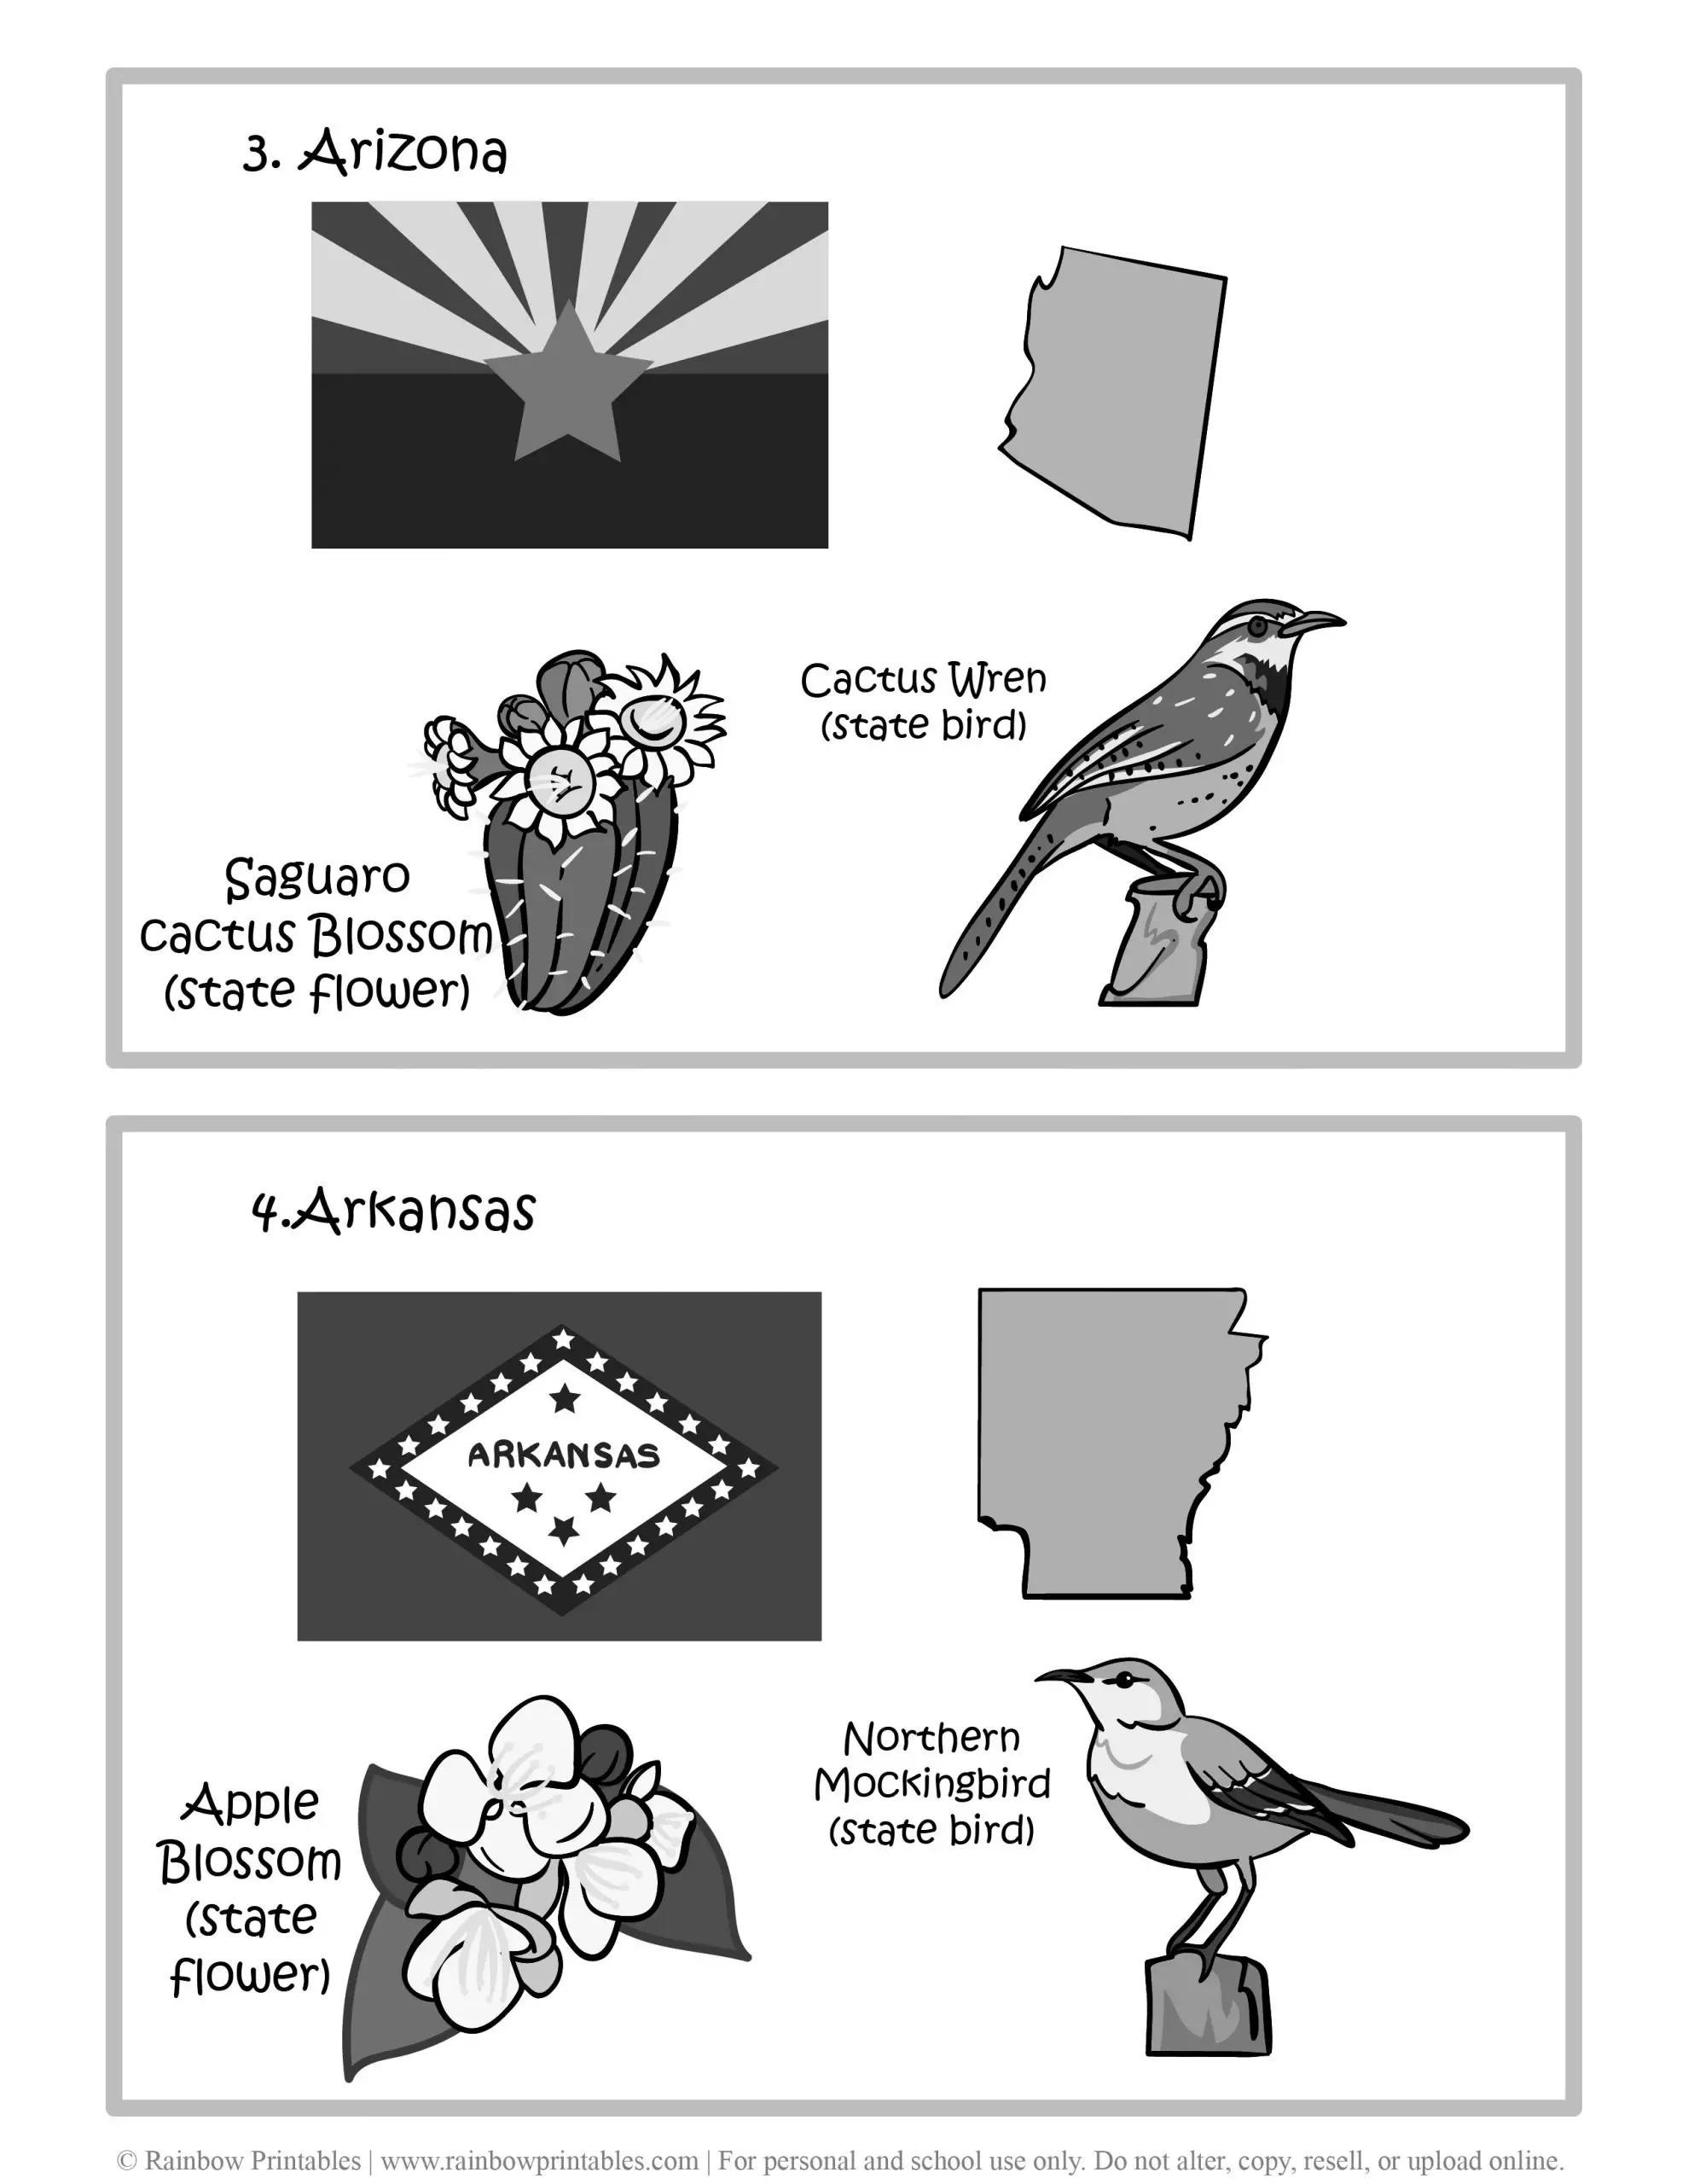 Arizona, Arkansas, 50 US State Flag, State Bird, State Flower, United States of America - American States Geography Worksheet Class Lesson Printables Flashcards Black White